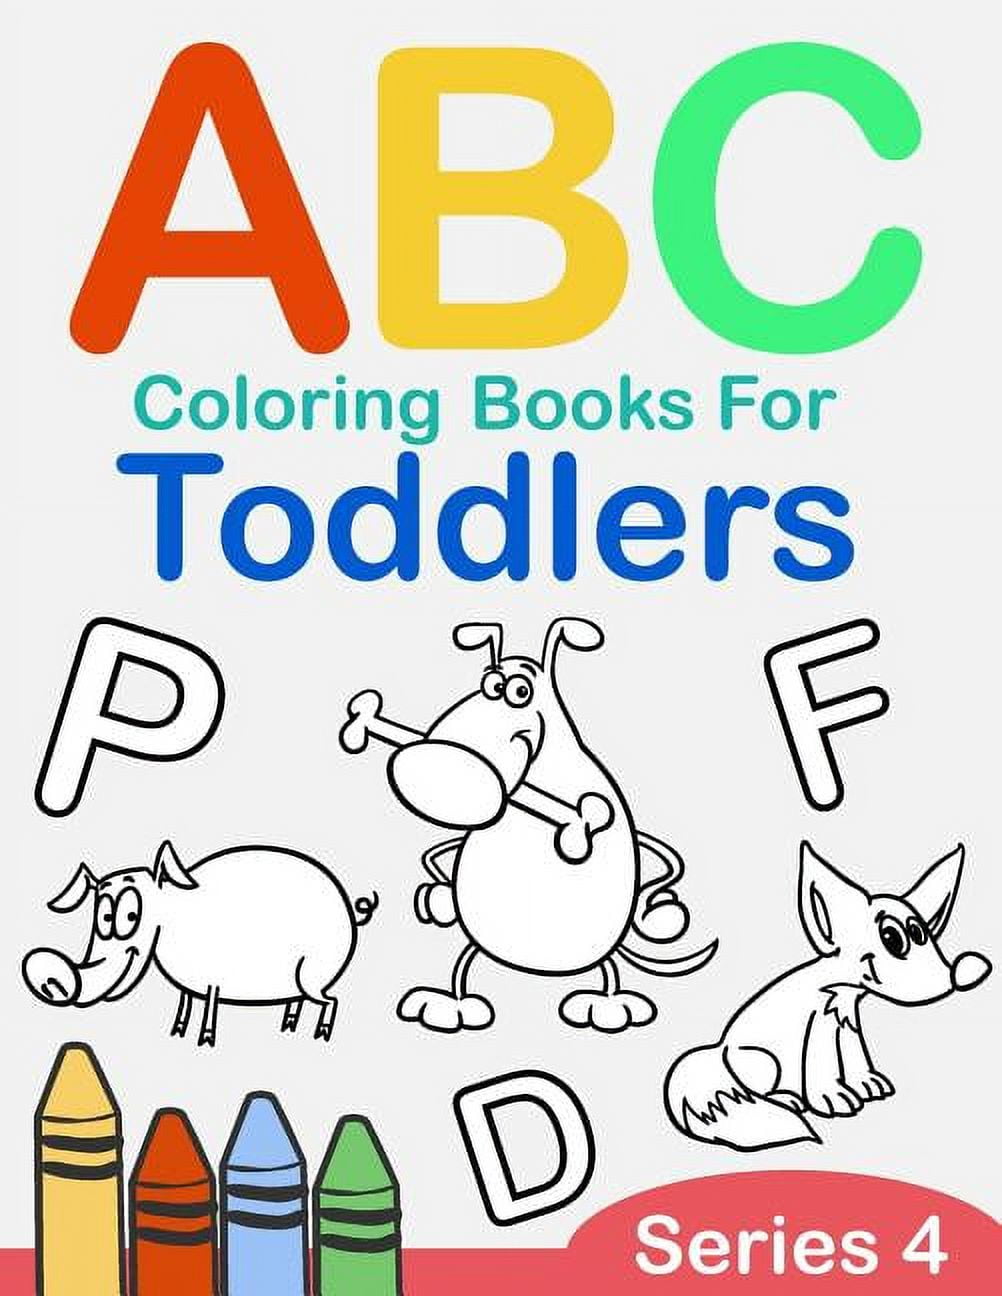 Coloring book letter A-Z Number 1-10: Fun with Numbers, Letters, Animals  Easy and Big Coloring Books for Toddlers Kids Ages 2-4, 4-6, Boys, Girls,  Fun, Love Play Happy, 9798649713009